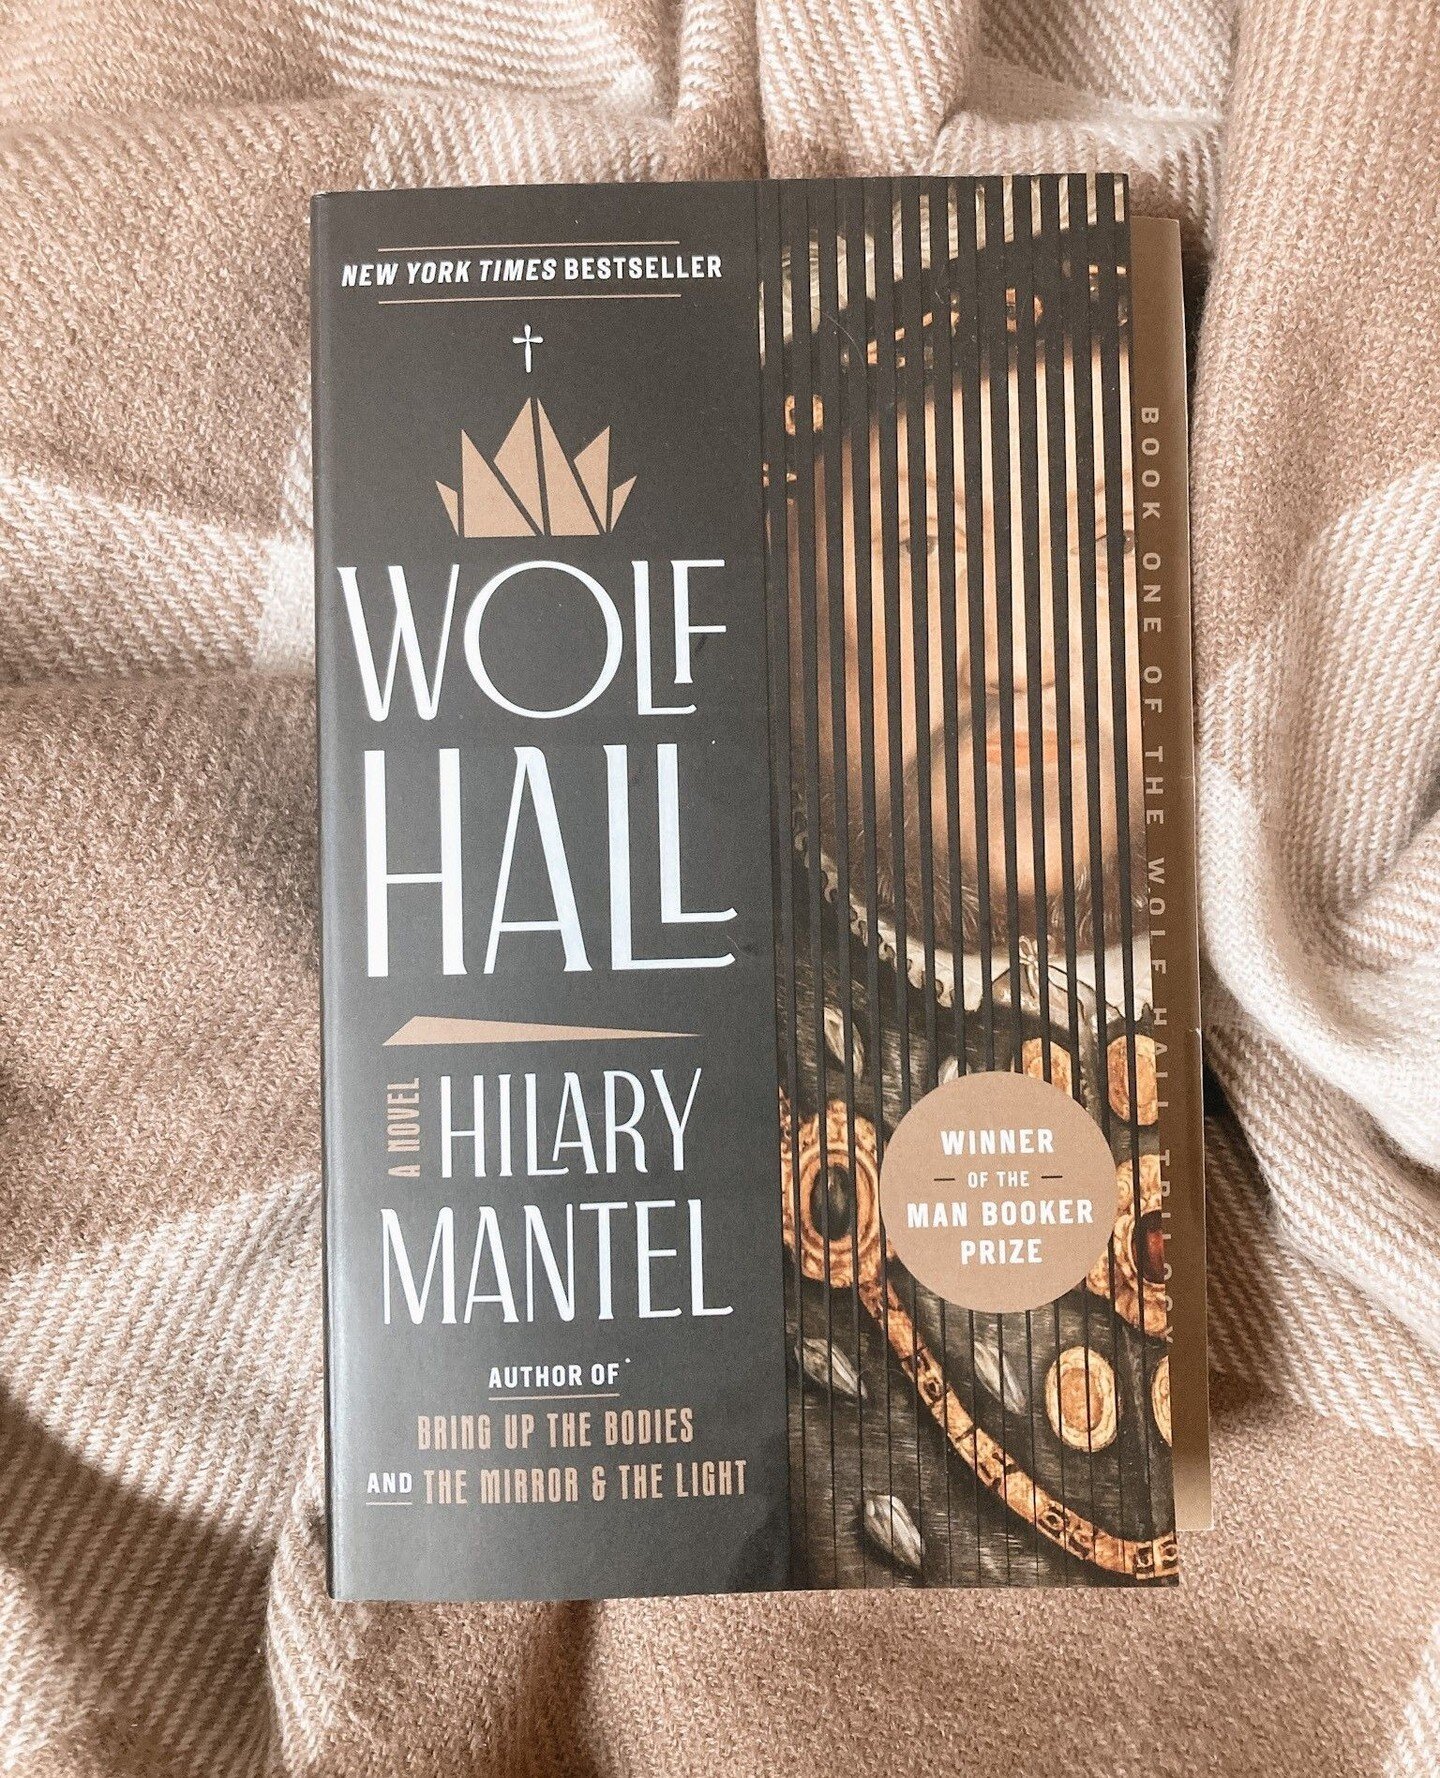 As I am taking part in the Footnotes &amp; Tangents Slow Read of Hilary Mantel&rsquo;s Cromwell trilogy this year, I thought it fitting to feature the first book in that series, Wolf Hall, as my Friday recommendation this week. ⁠
⁠
For writers, there